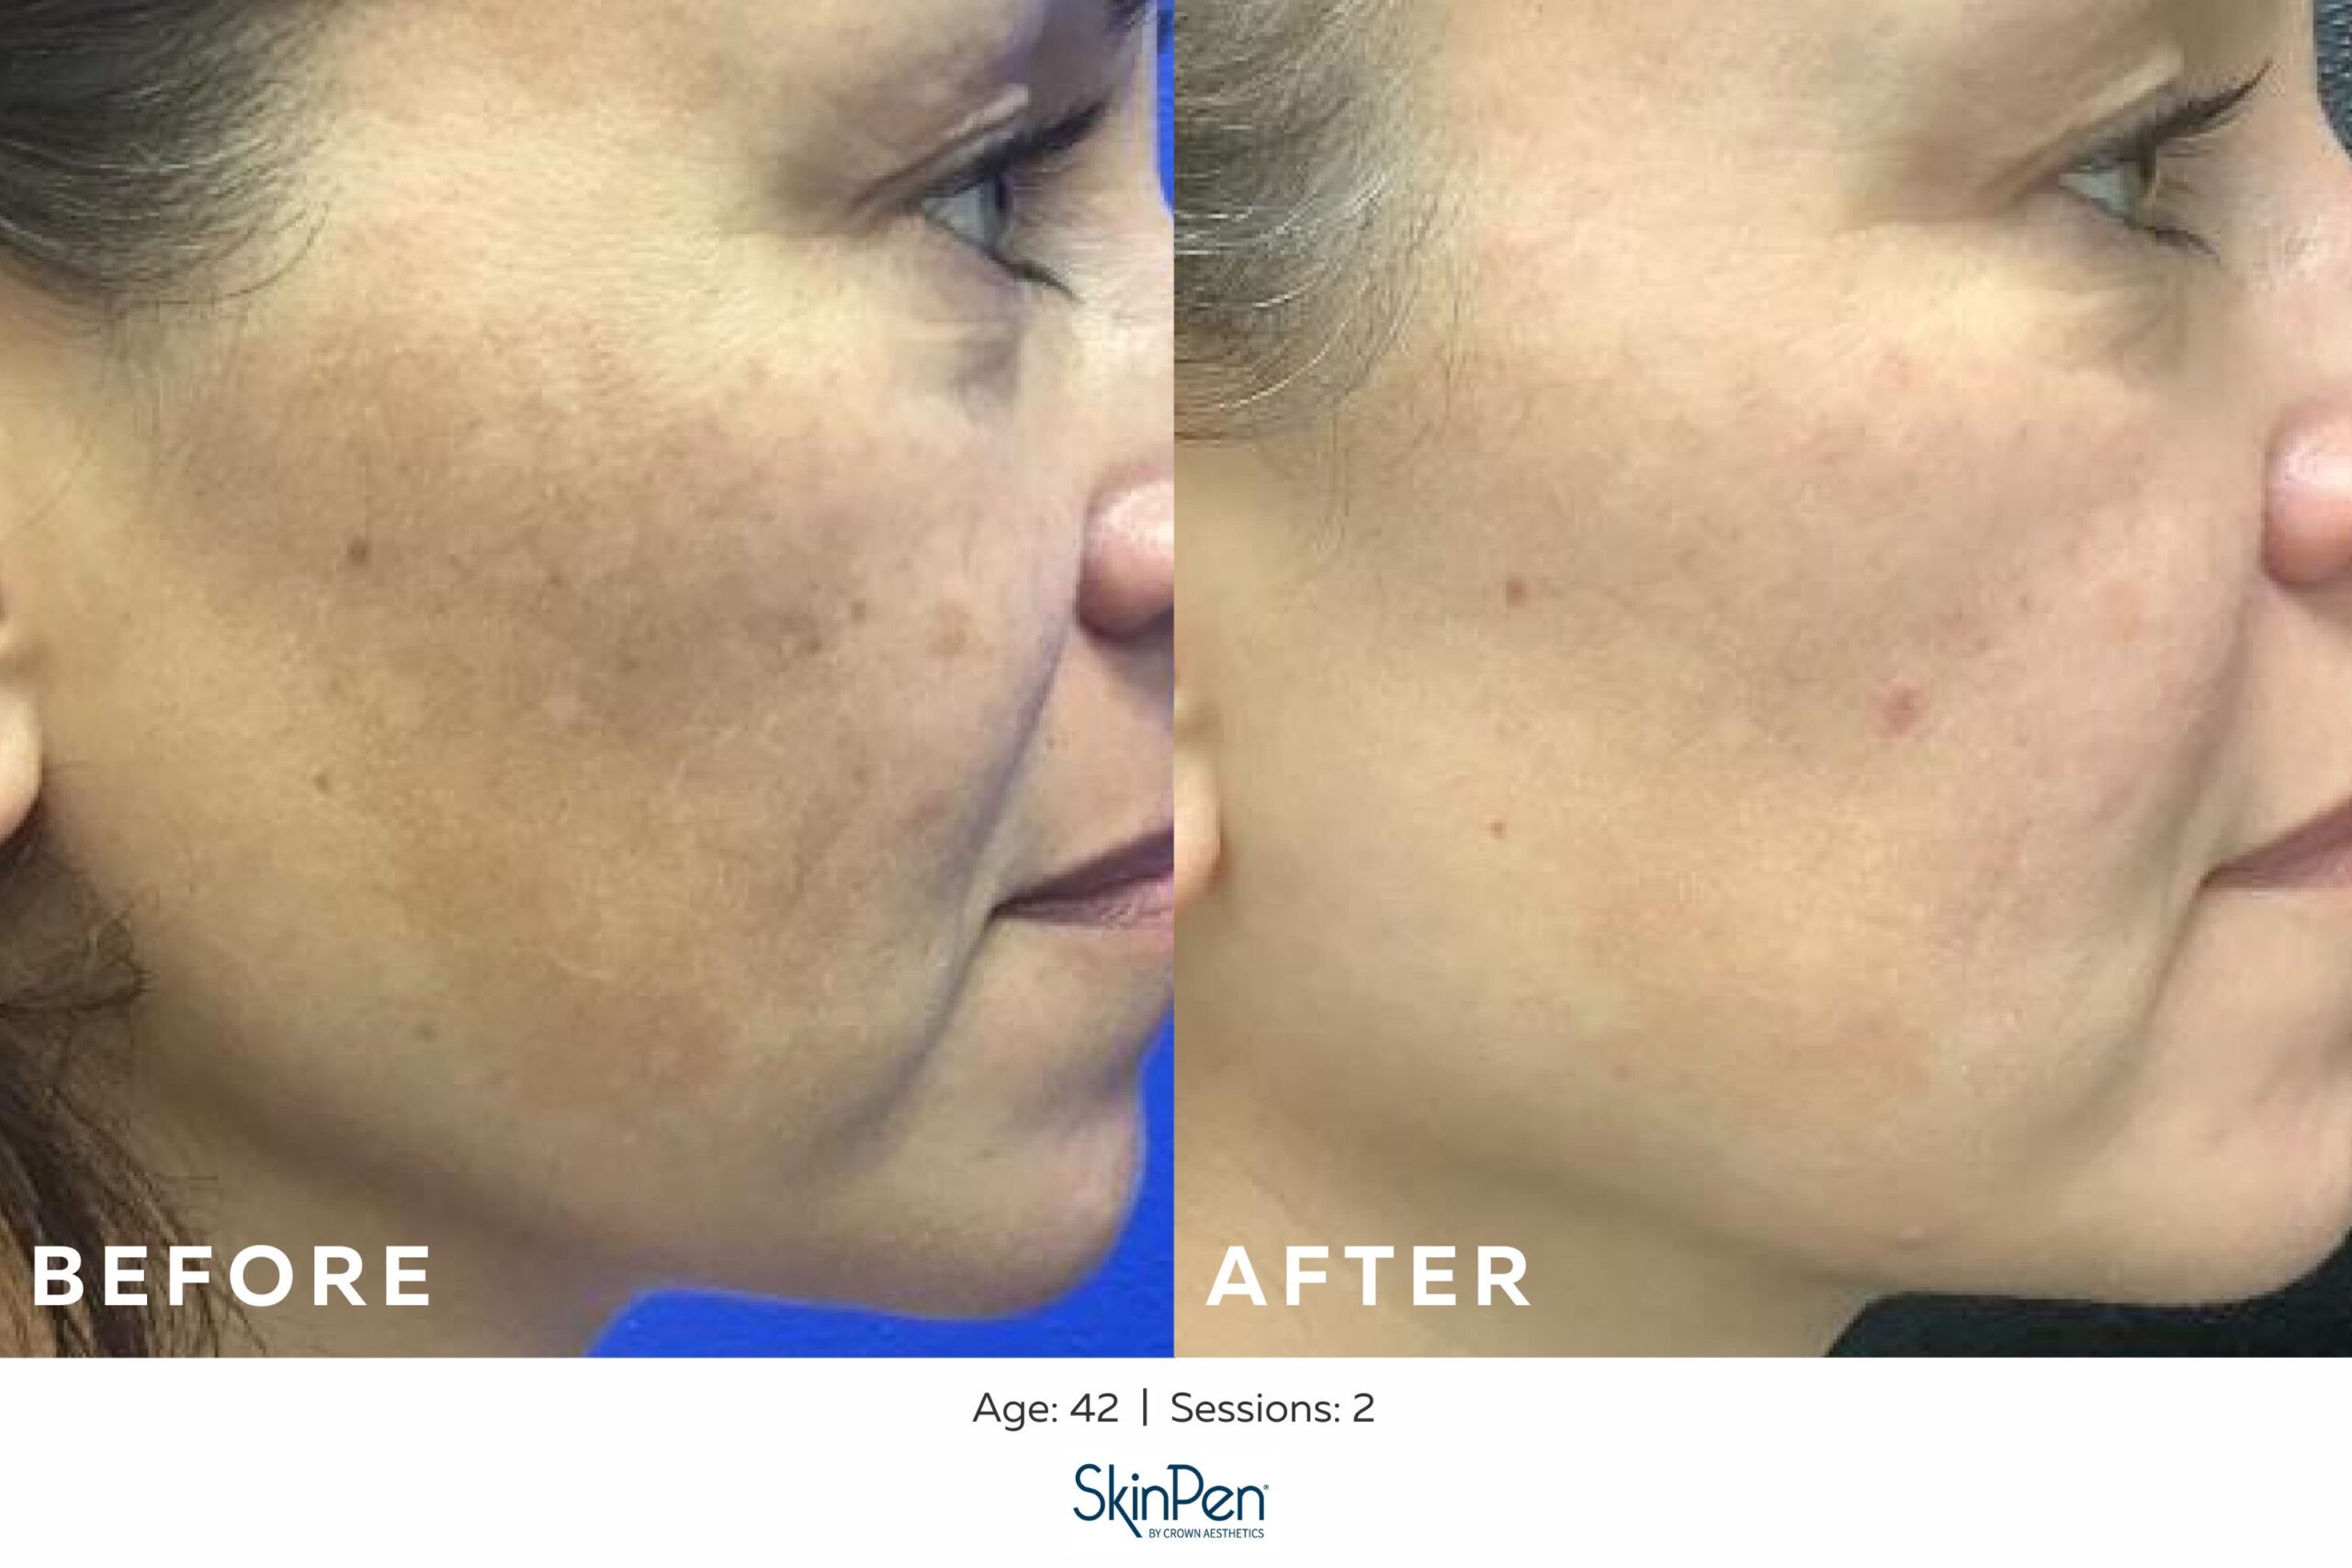 SkinPen Microneedling for Pigmentation, Before and After Image